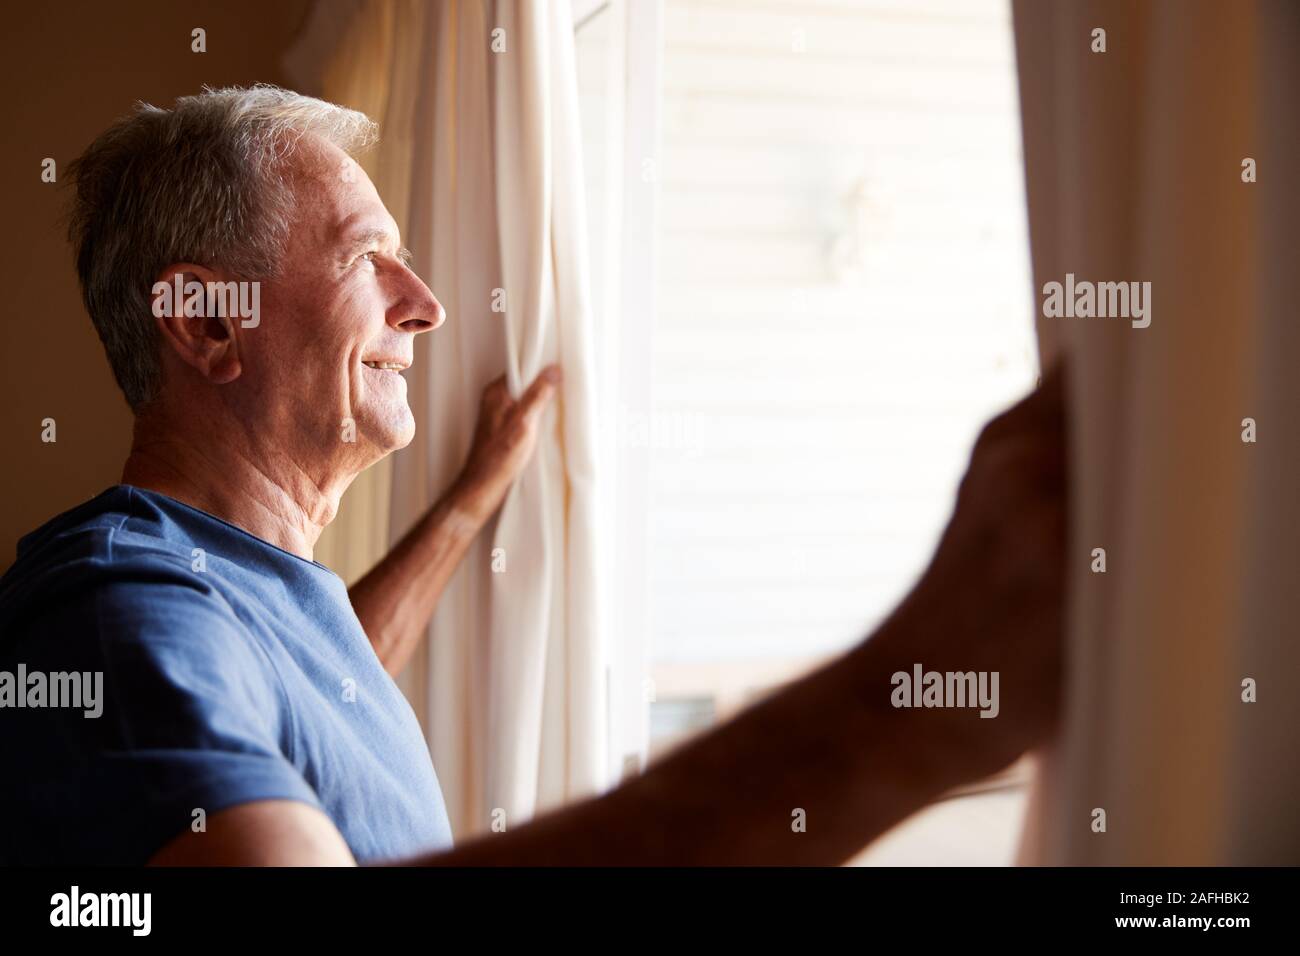 Smiling senior white man opening the curtains on a sunny morning, side view, close up Stock Photo